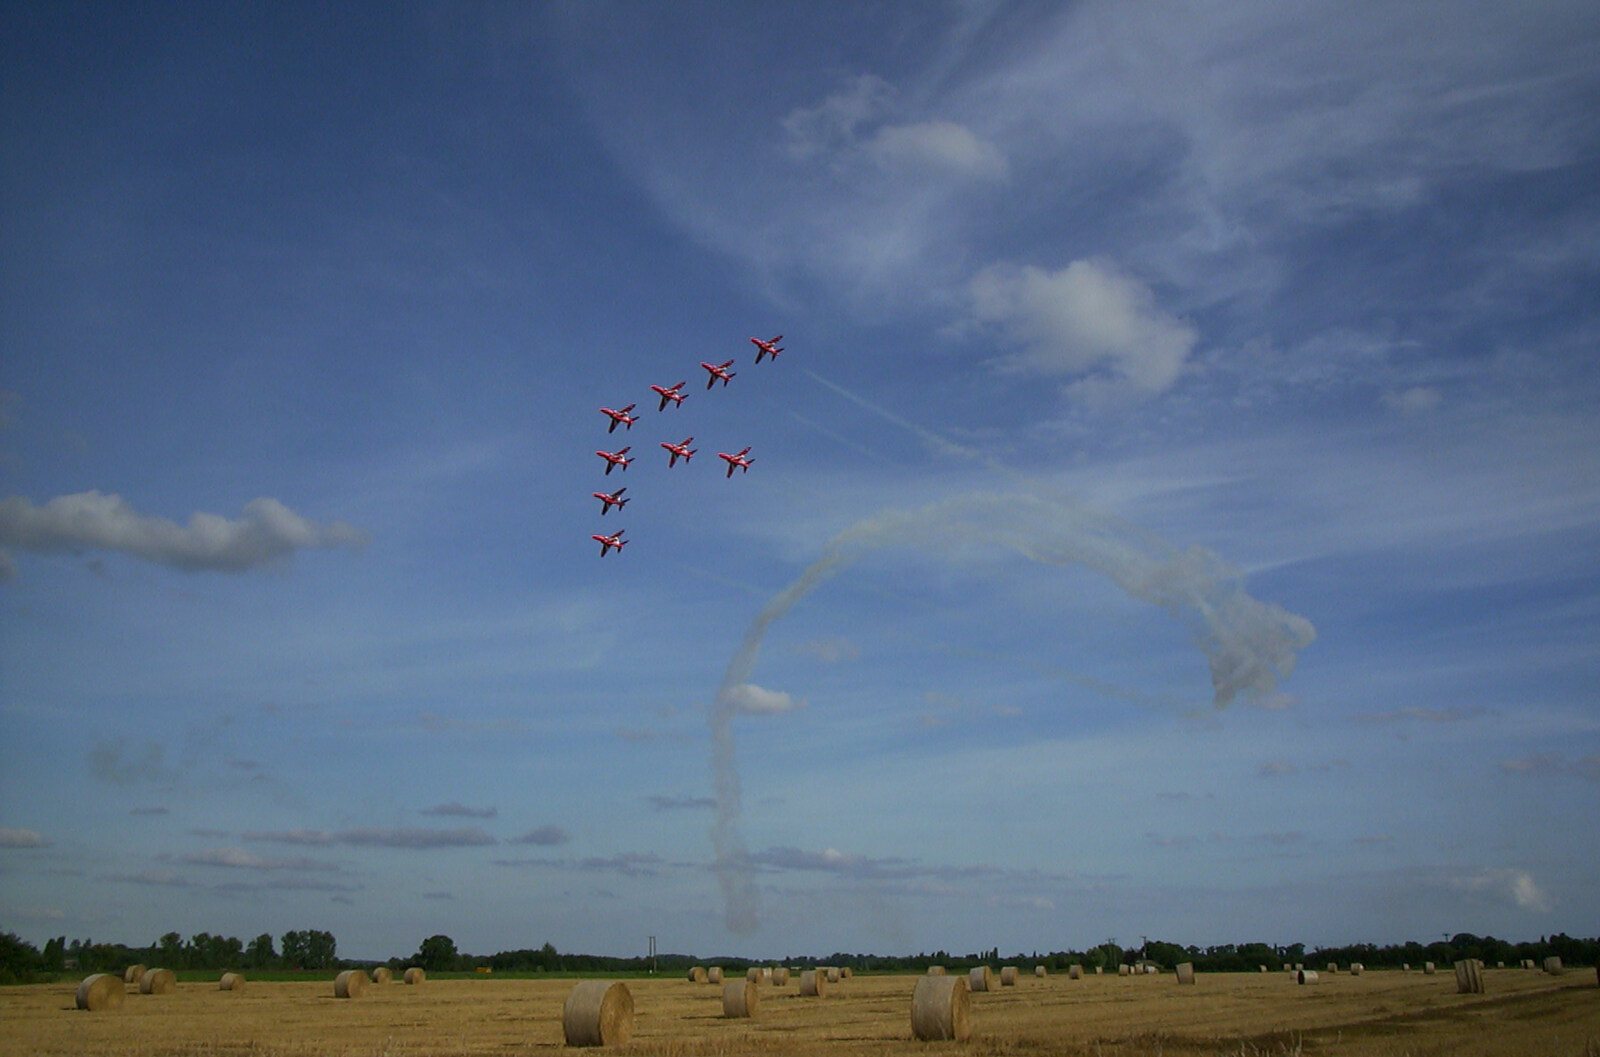 The Red Arrows fly over the back field from Alan gets a Cherry Picker, Brome, Suffolk - 2nd August 2002